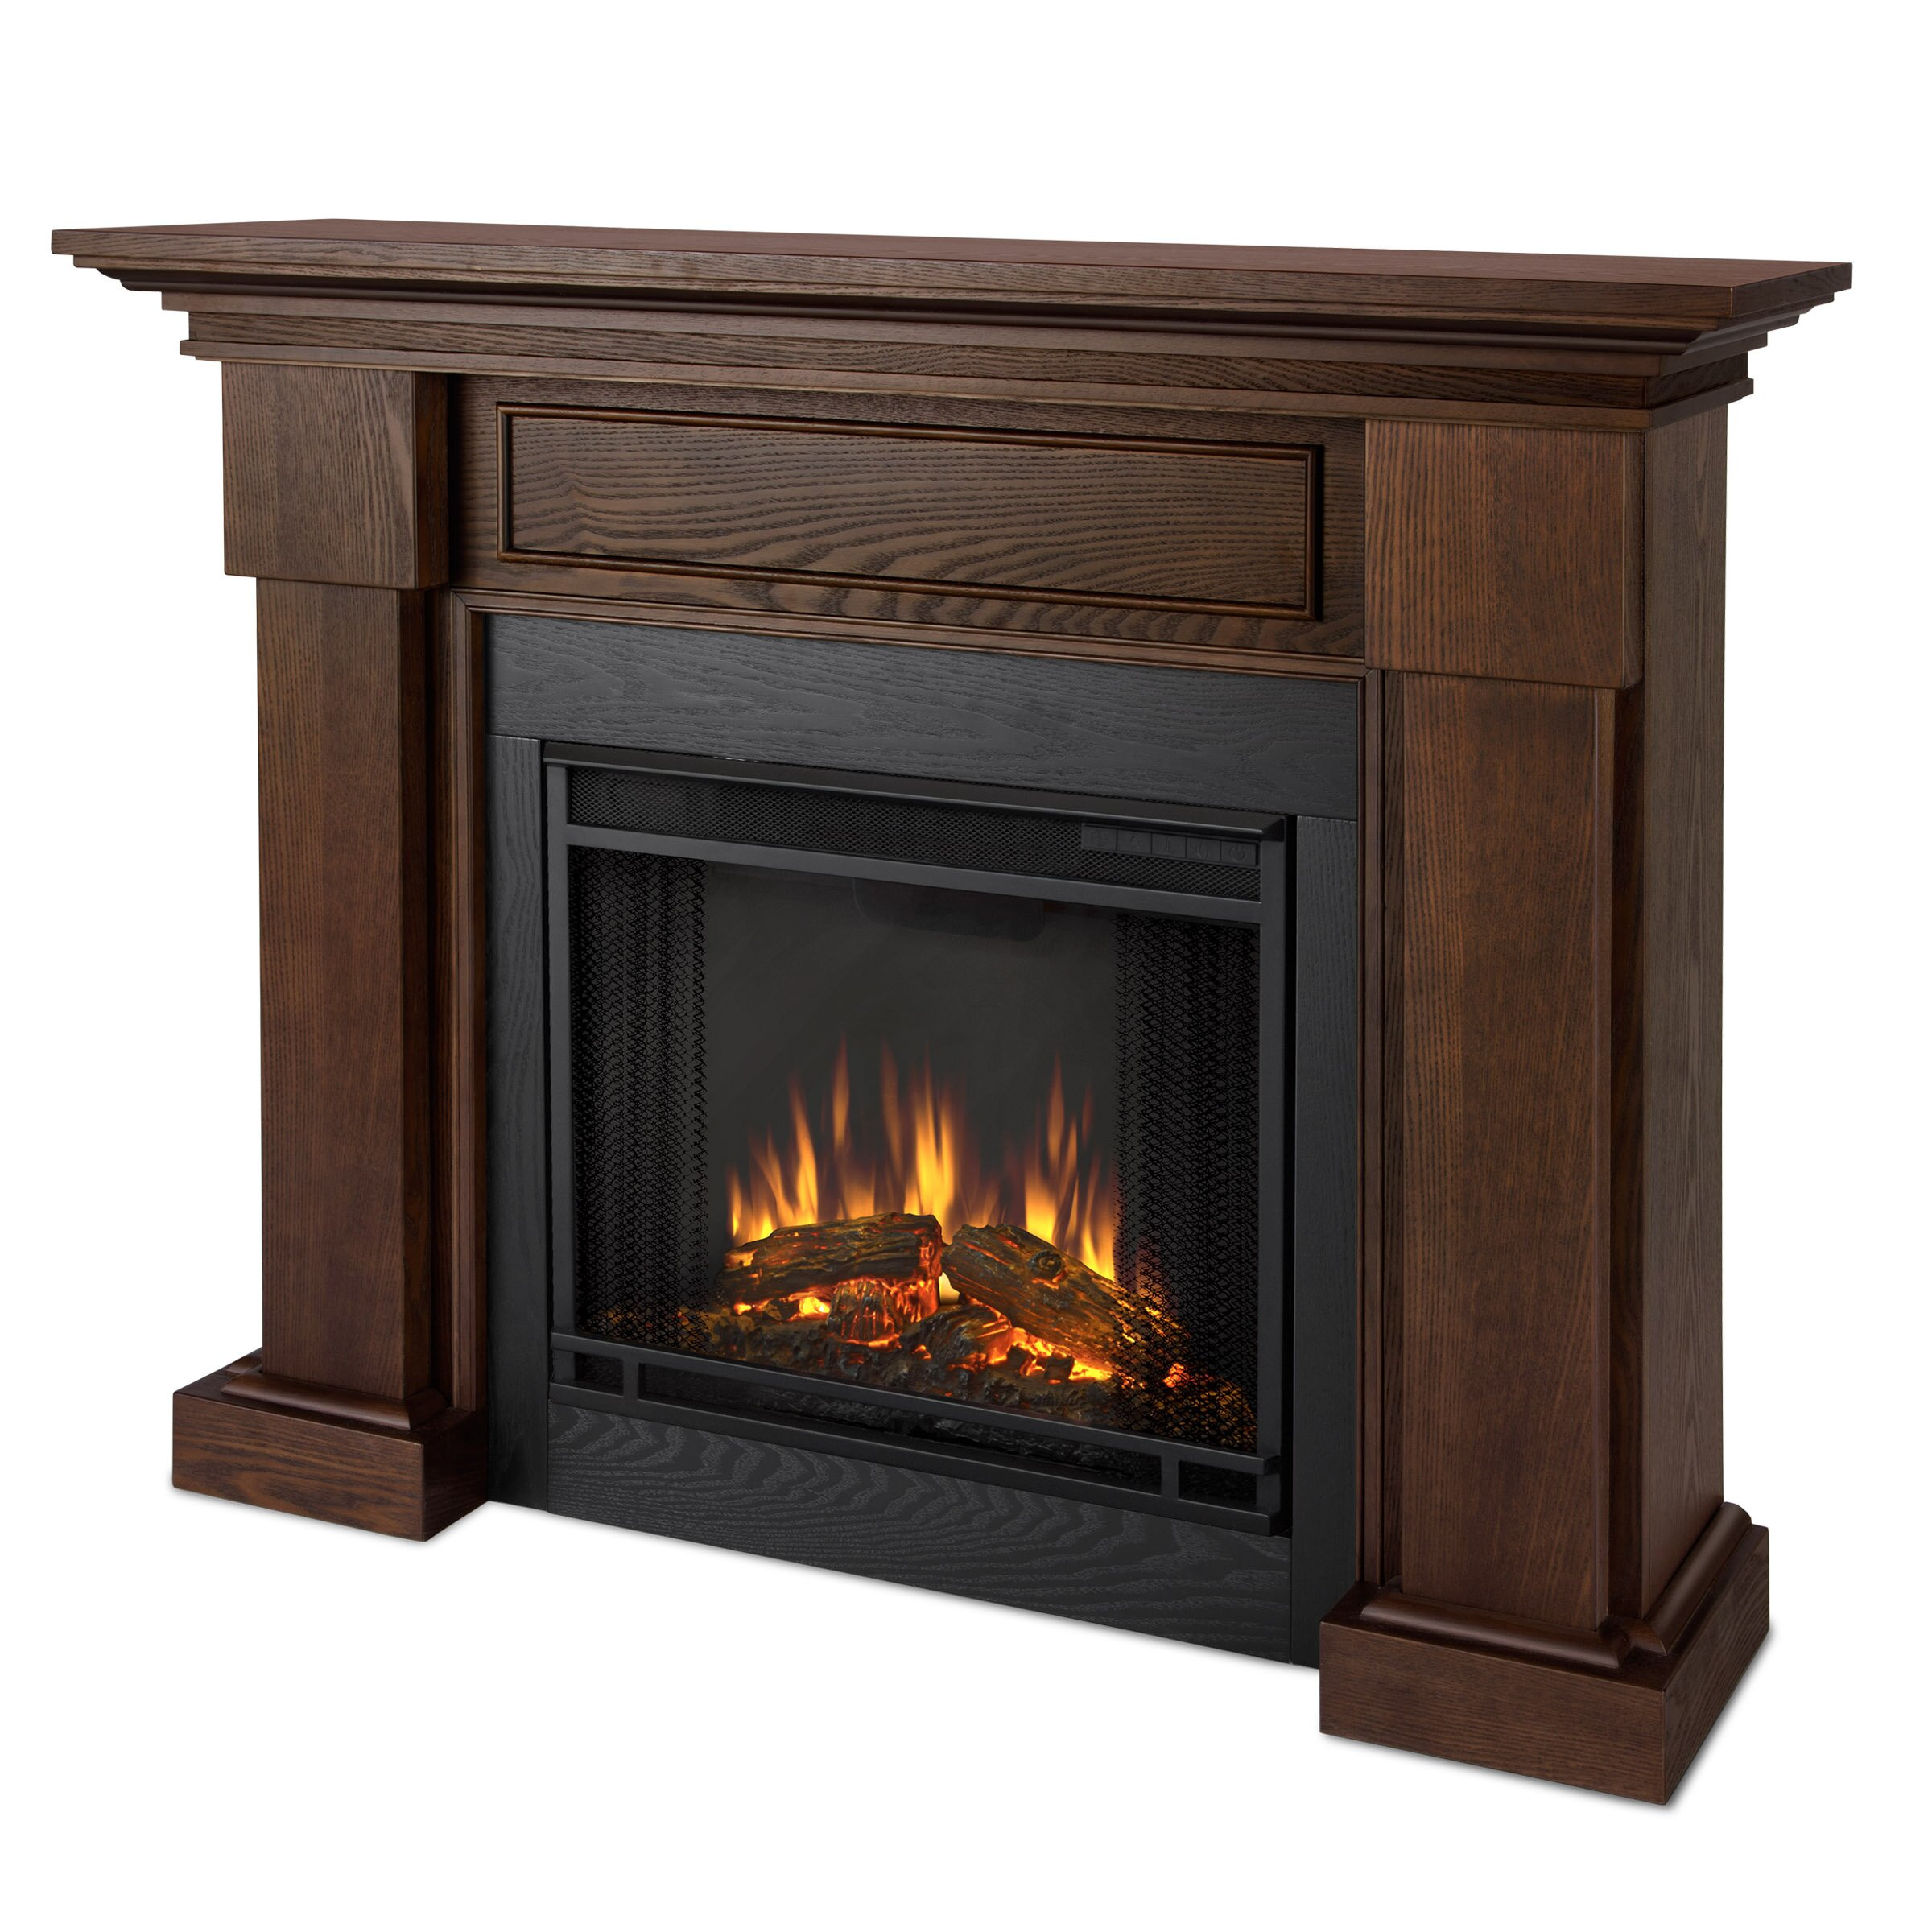 Real Flame Electric Fireplace Reviews
 Real Flame Hillcrest Electric Fireplace & Reviews